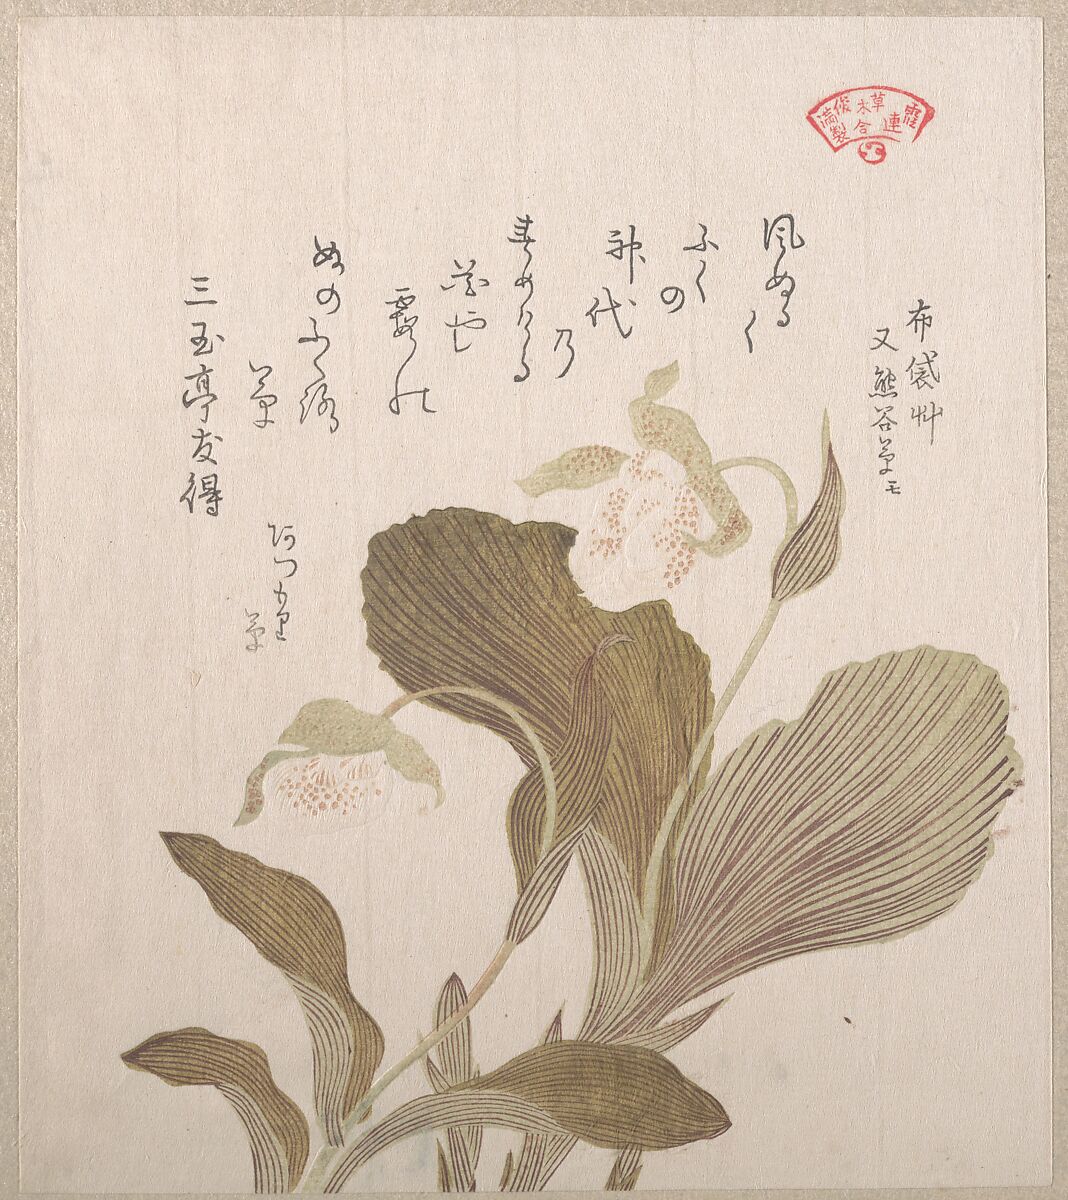 Hotei Flowers, Kubo Shunman (Japanese, 1757–1820), Part of an album of woodblock prints (surimono); ink and color on paper, Japan 